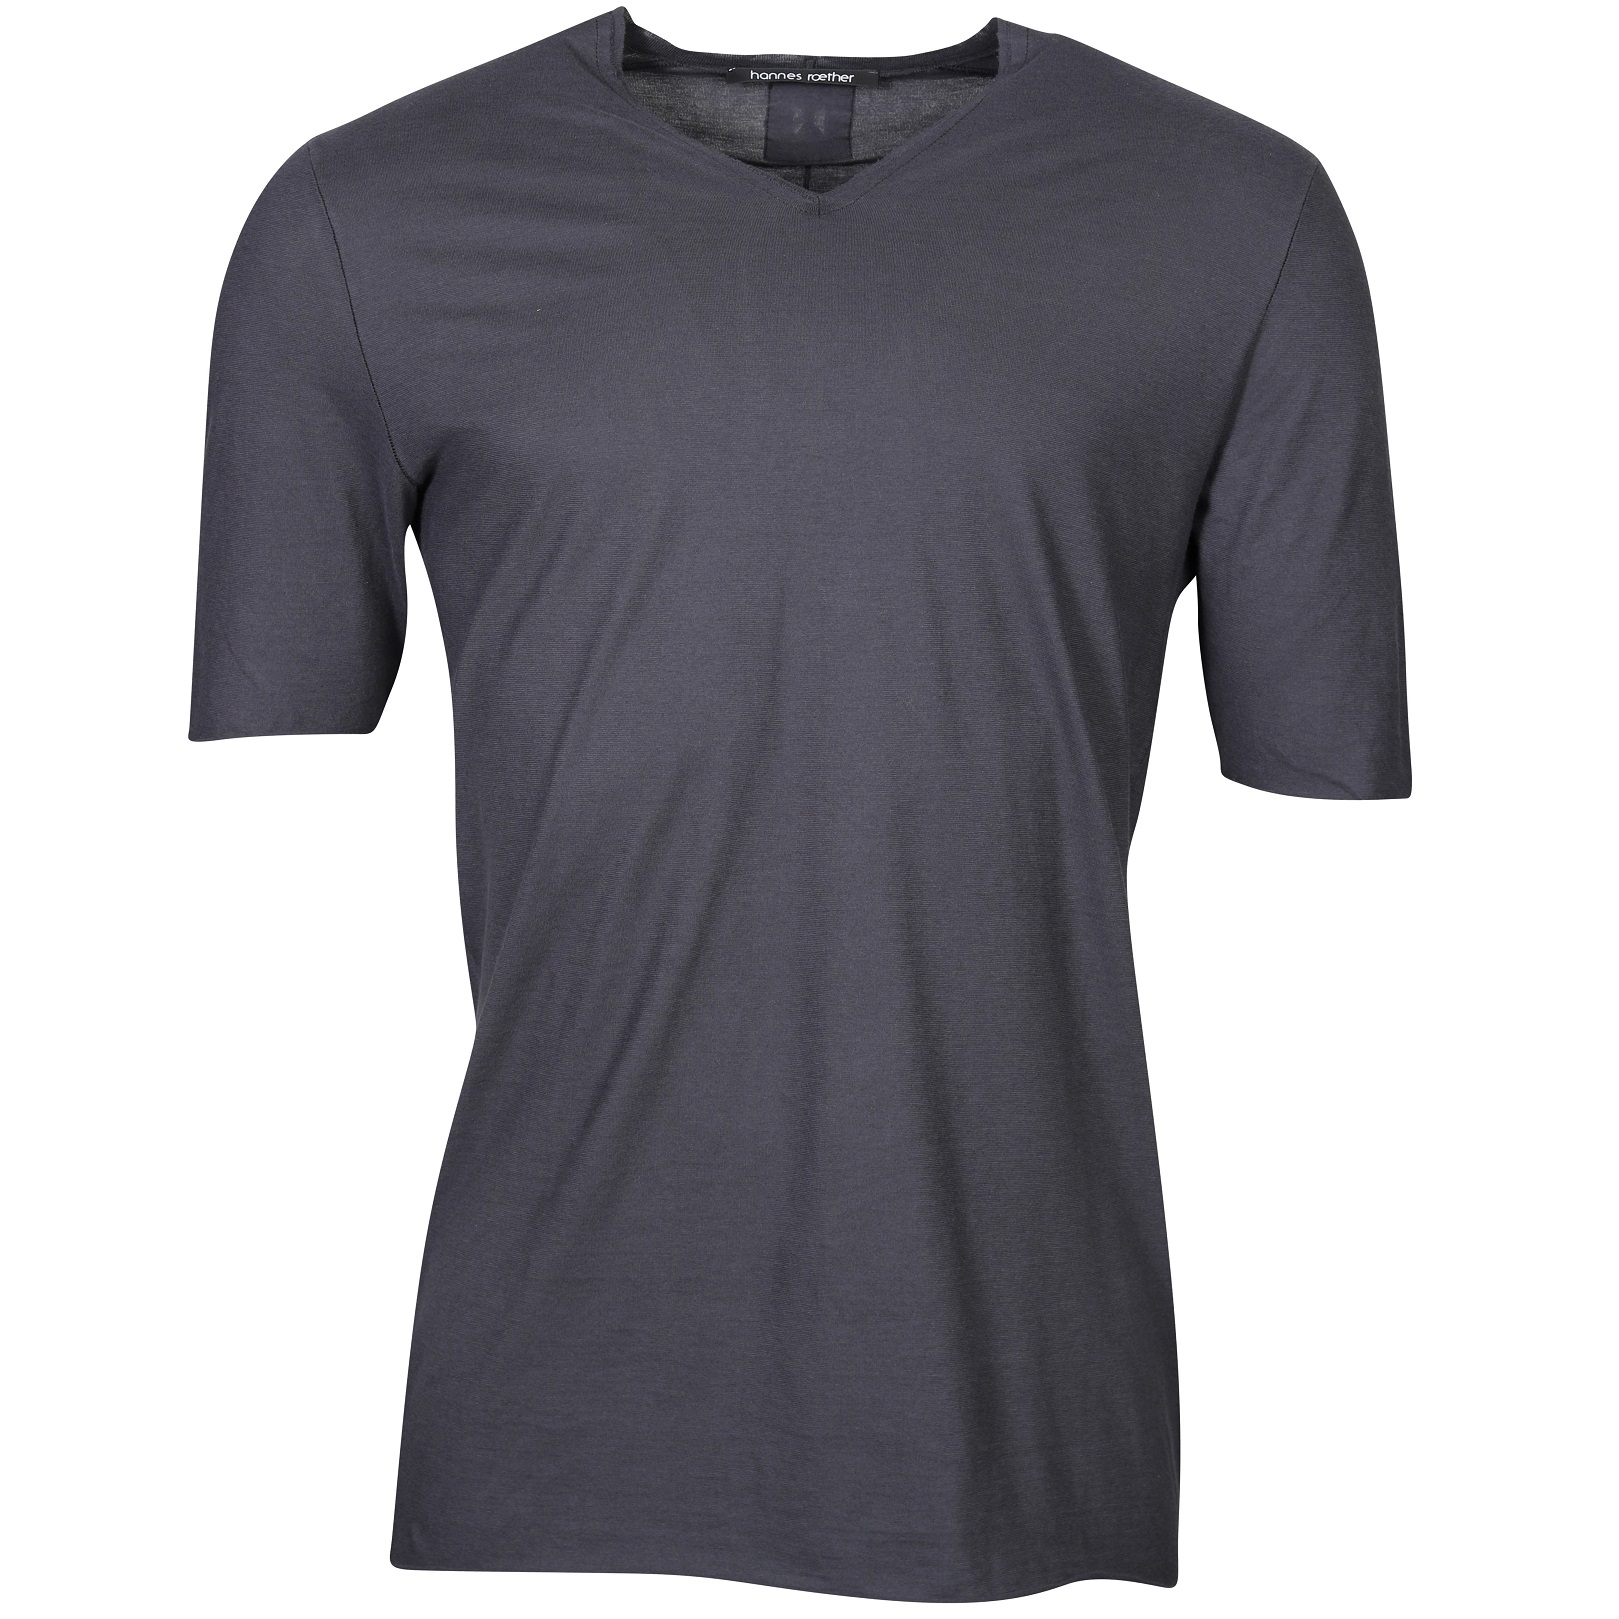 HANNES ROETHER V-Neck T-Shirt in Posh